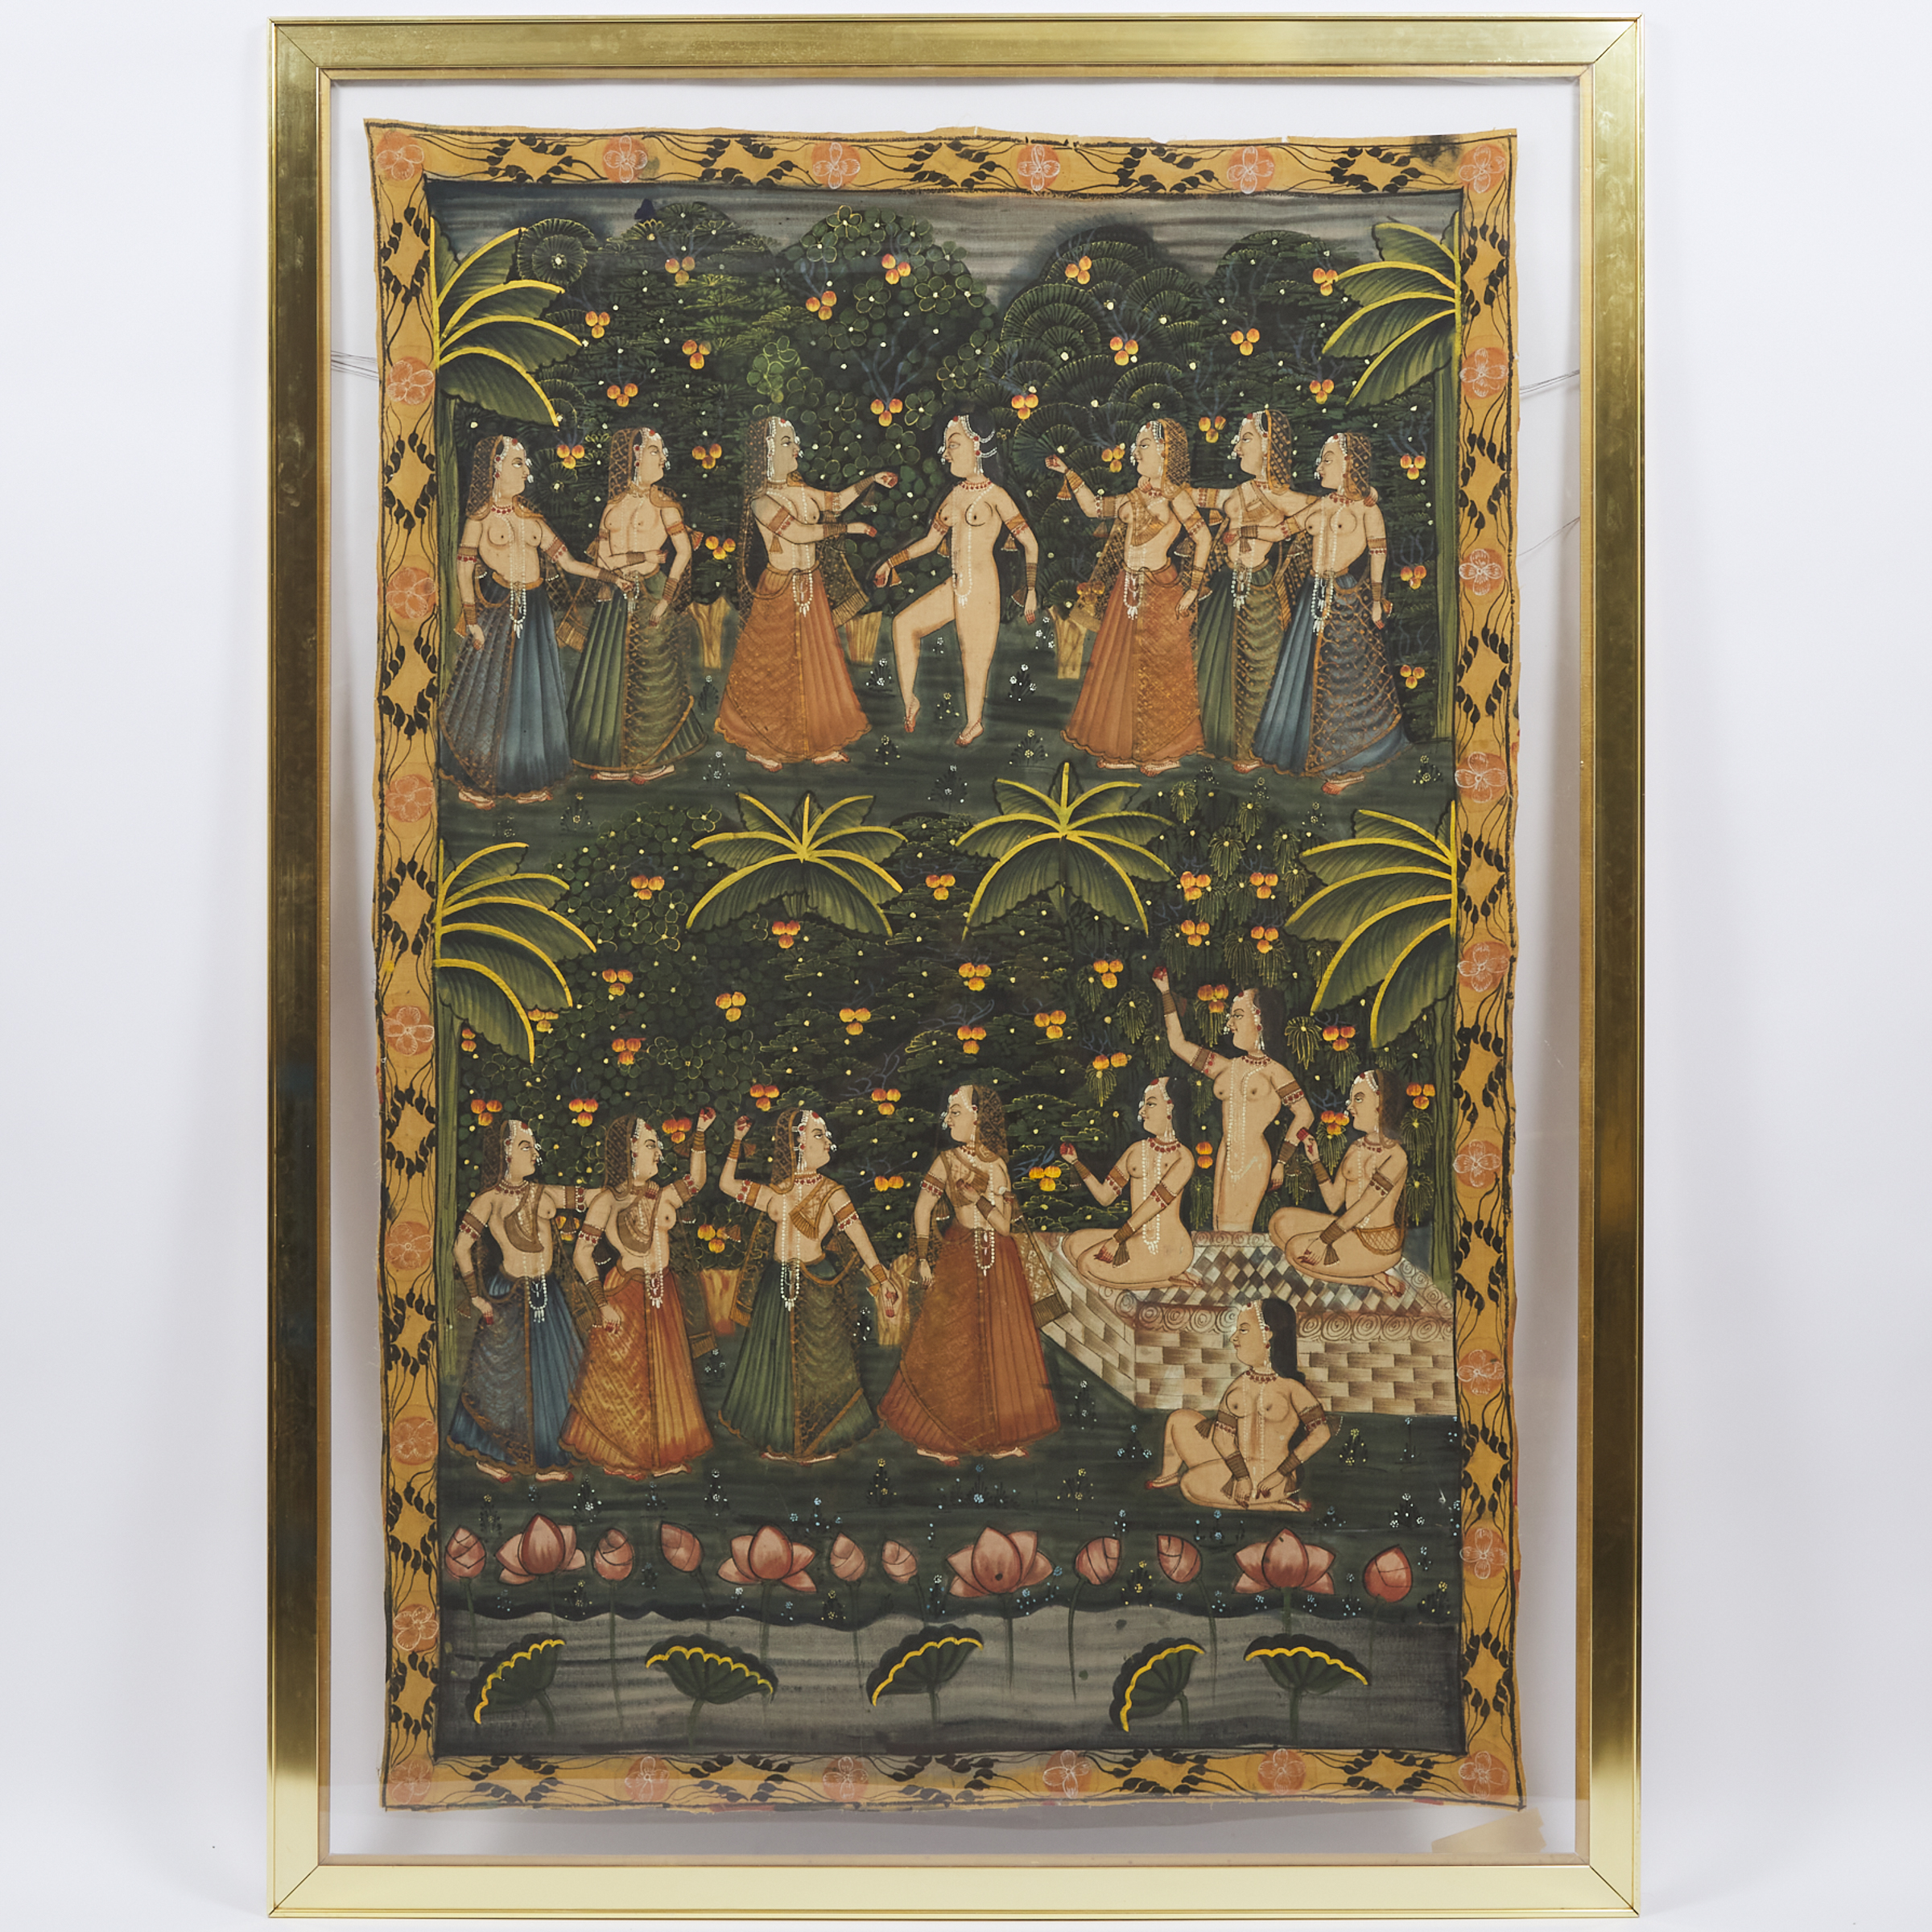 A Large Indian Pichwai/Picchvai of Gopis, Early to Mid 20th Century